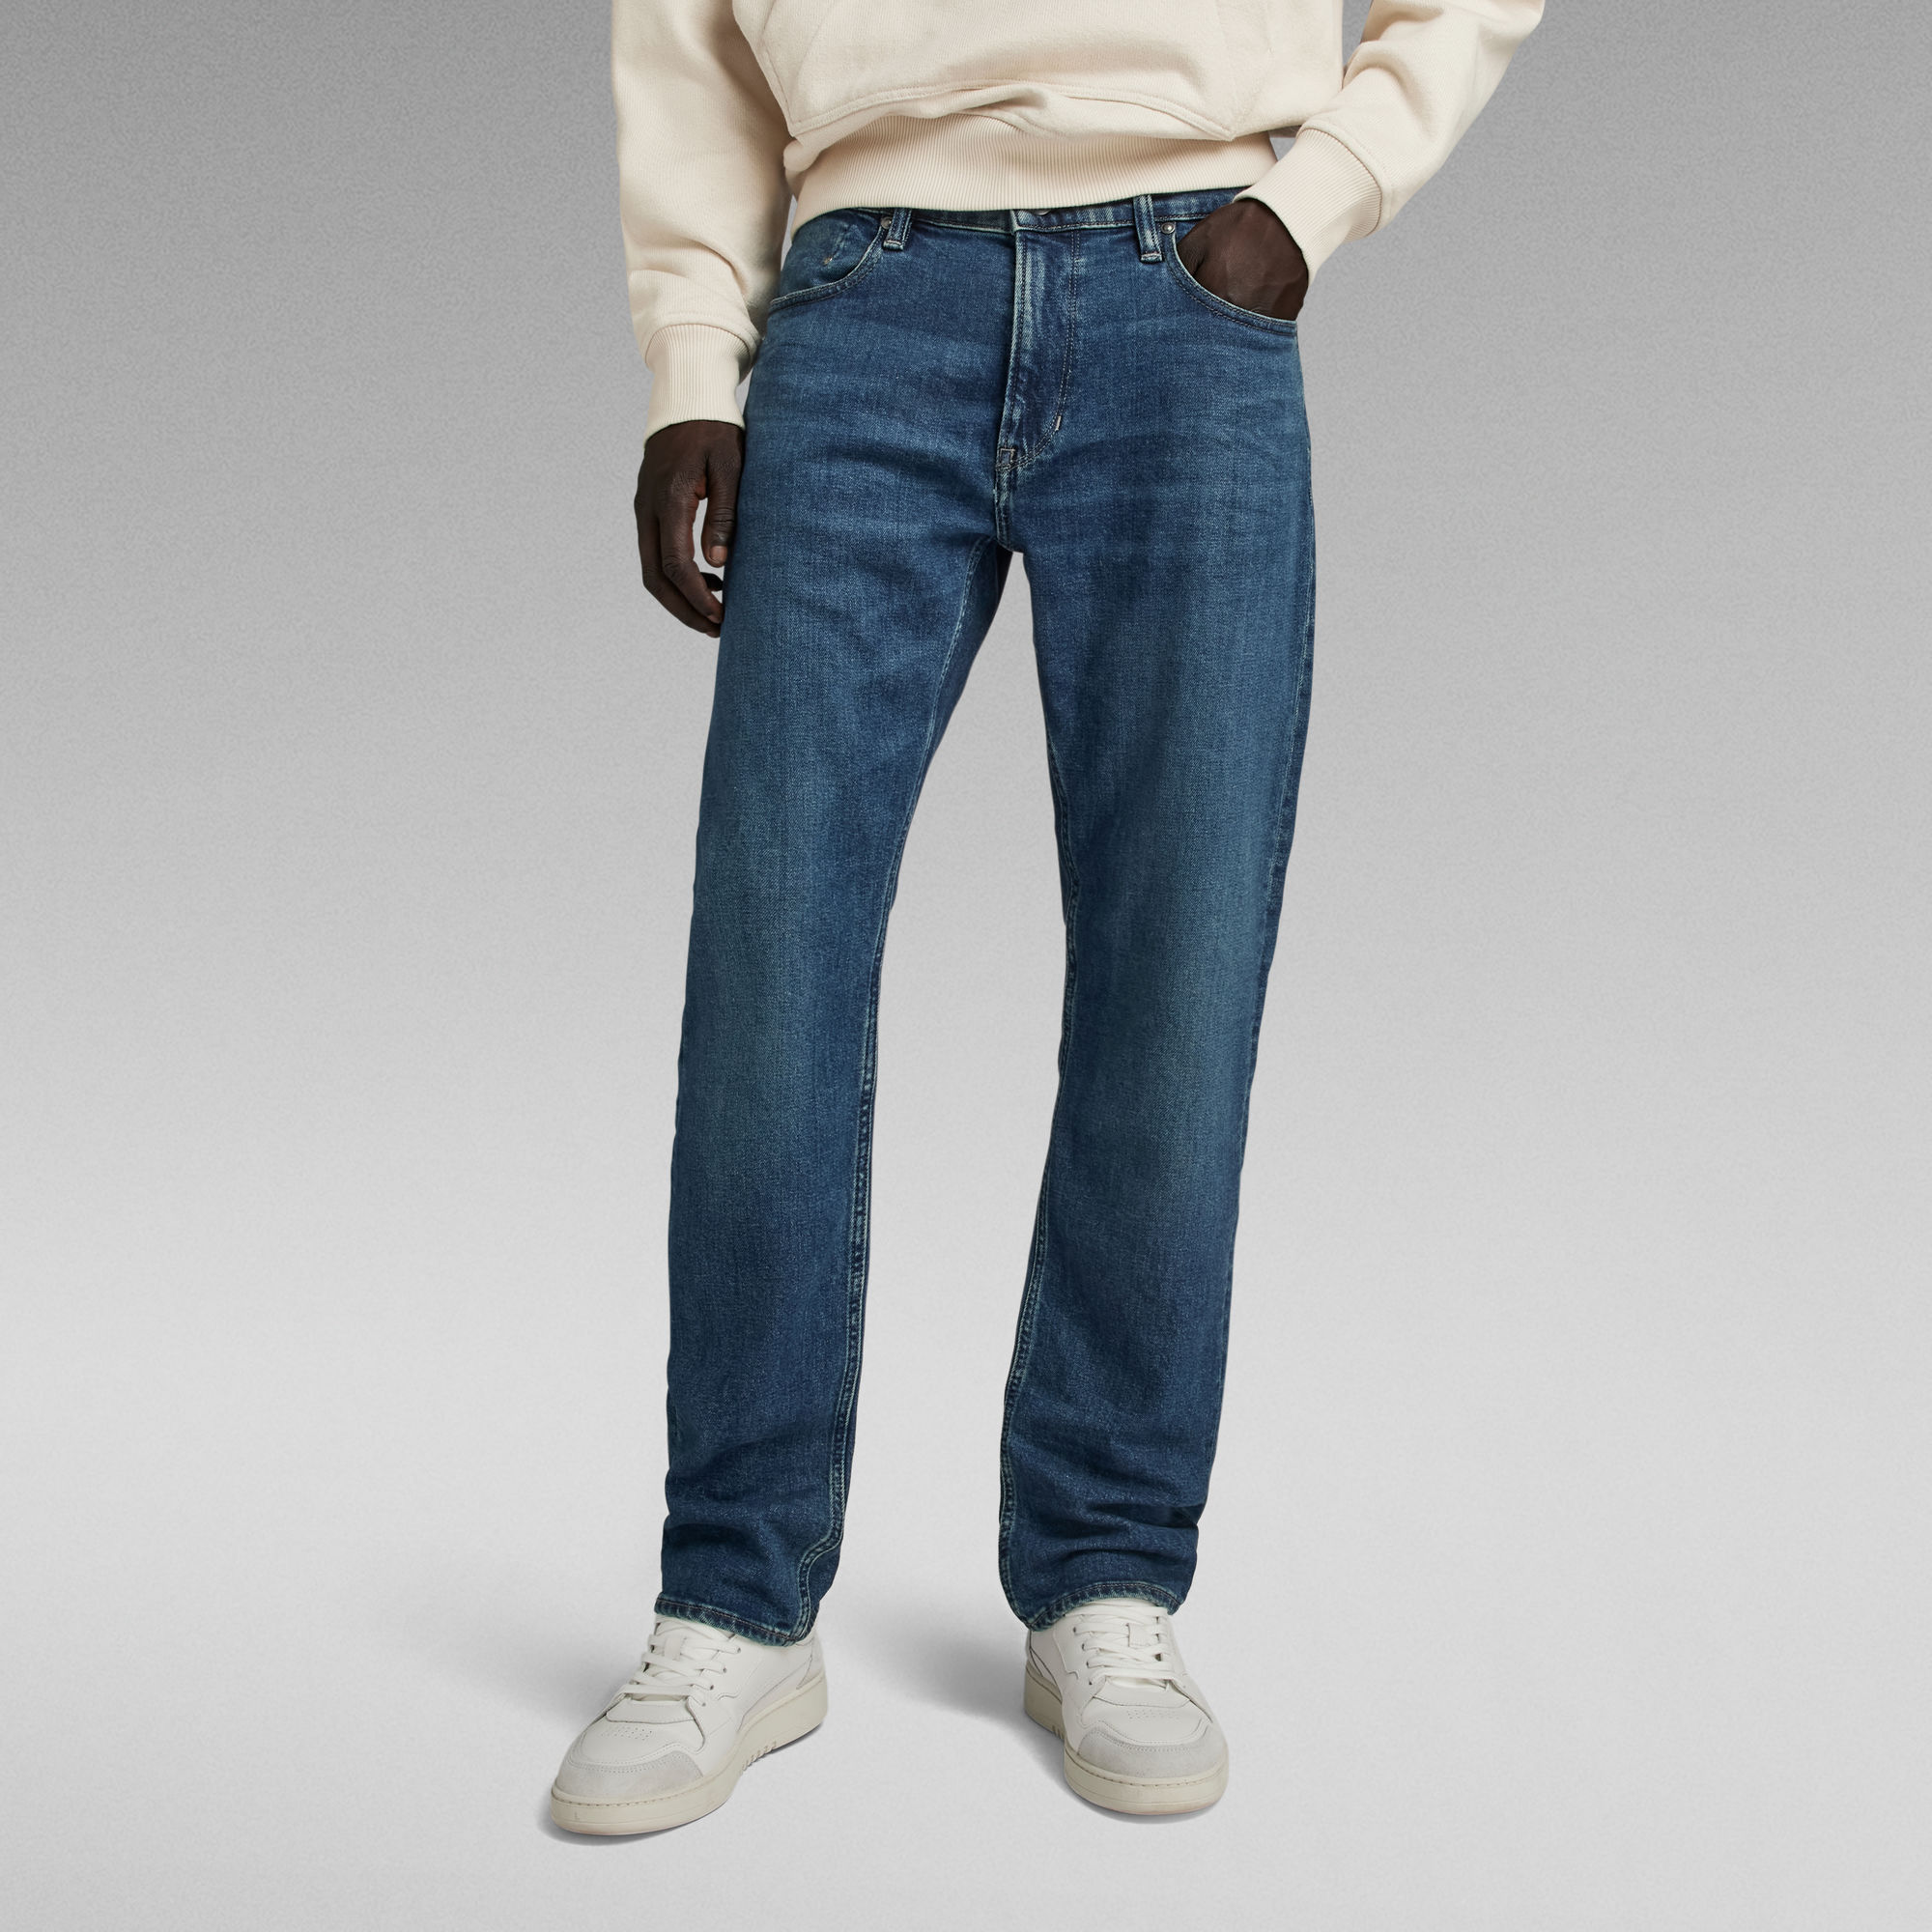 G-Star RAW Mosa Straight fit jeans worn in blue canal